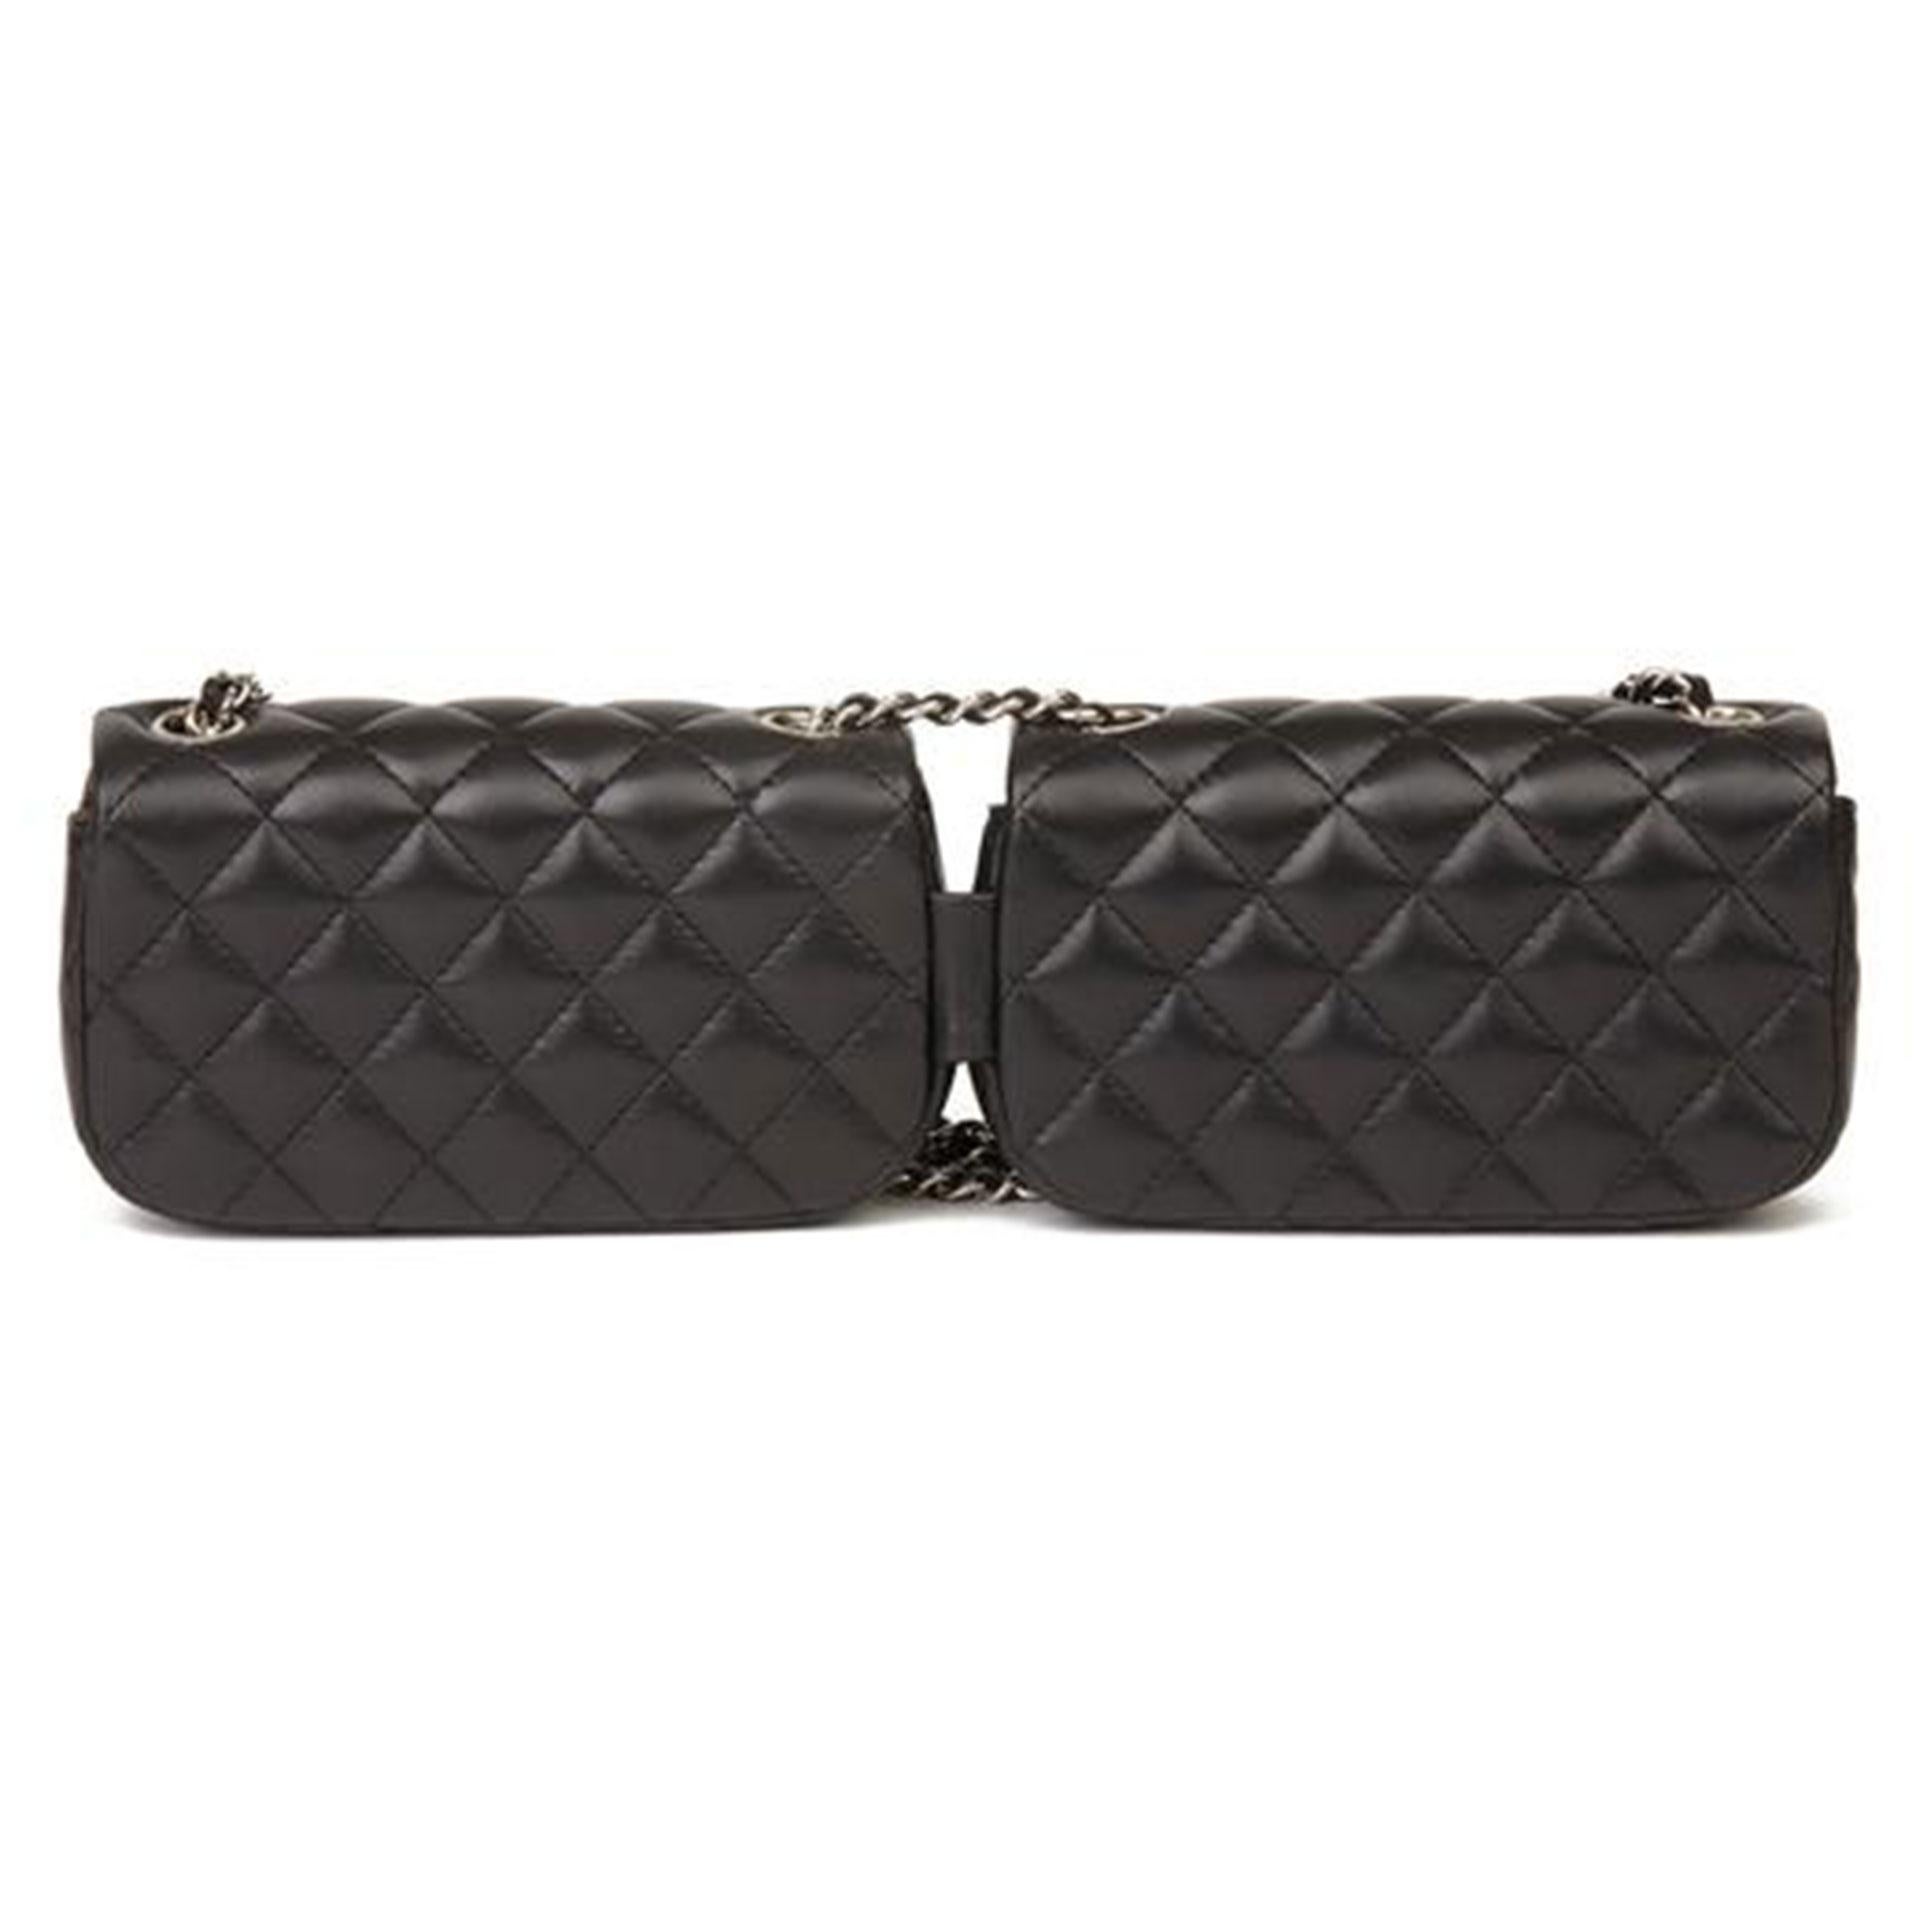 Chanel Side Pack Classic Flap 2.55 Reissue Rare Limited Edition Double Bag Set im Zustand „Gut“ im Angebot in Miami, FL